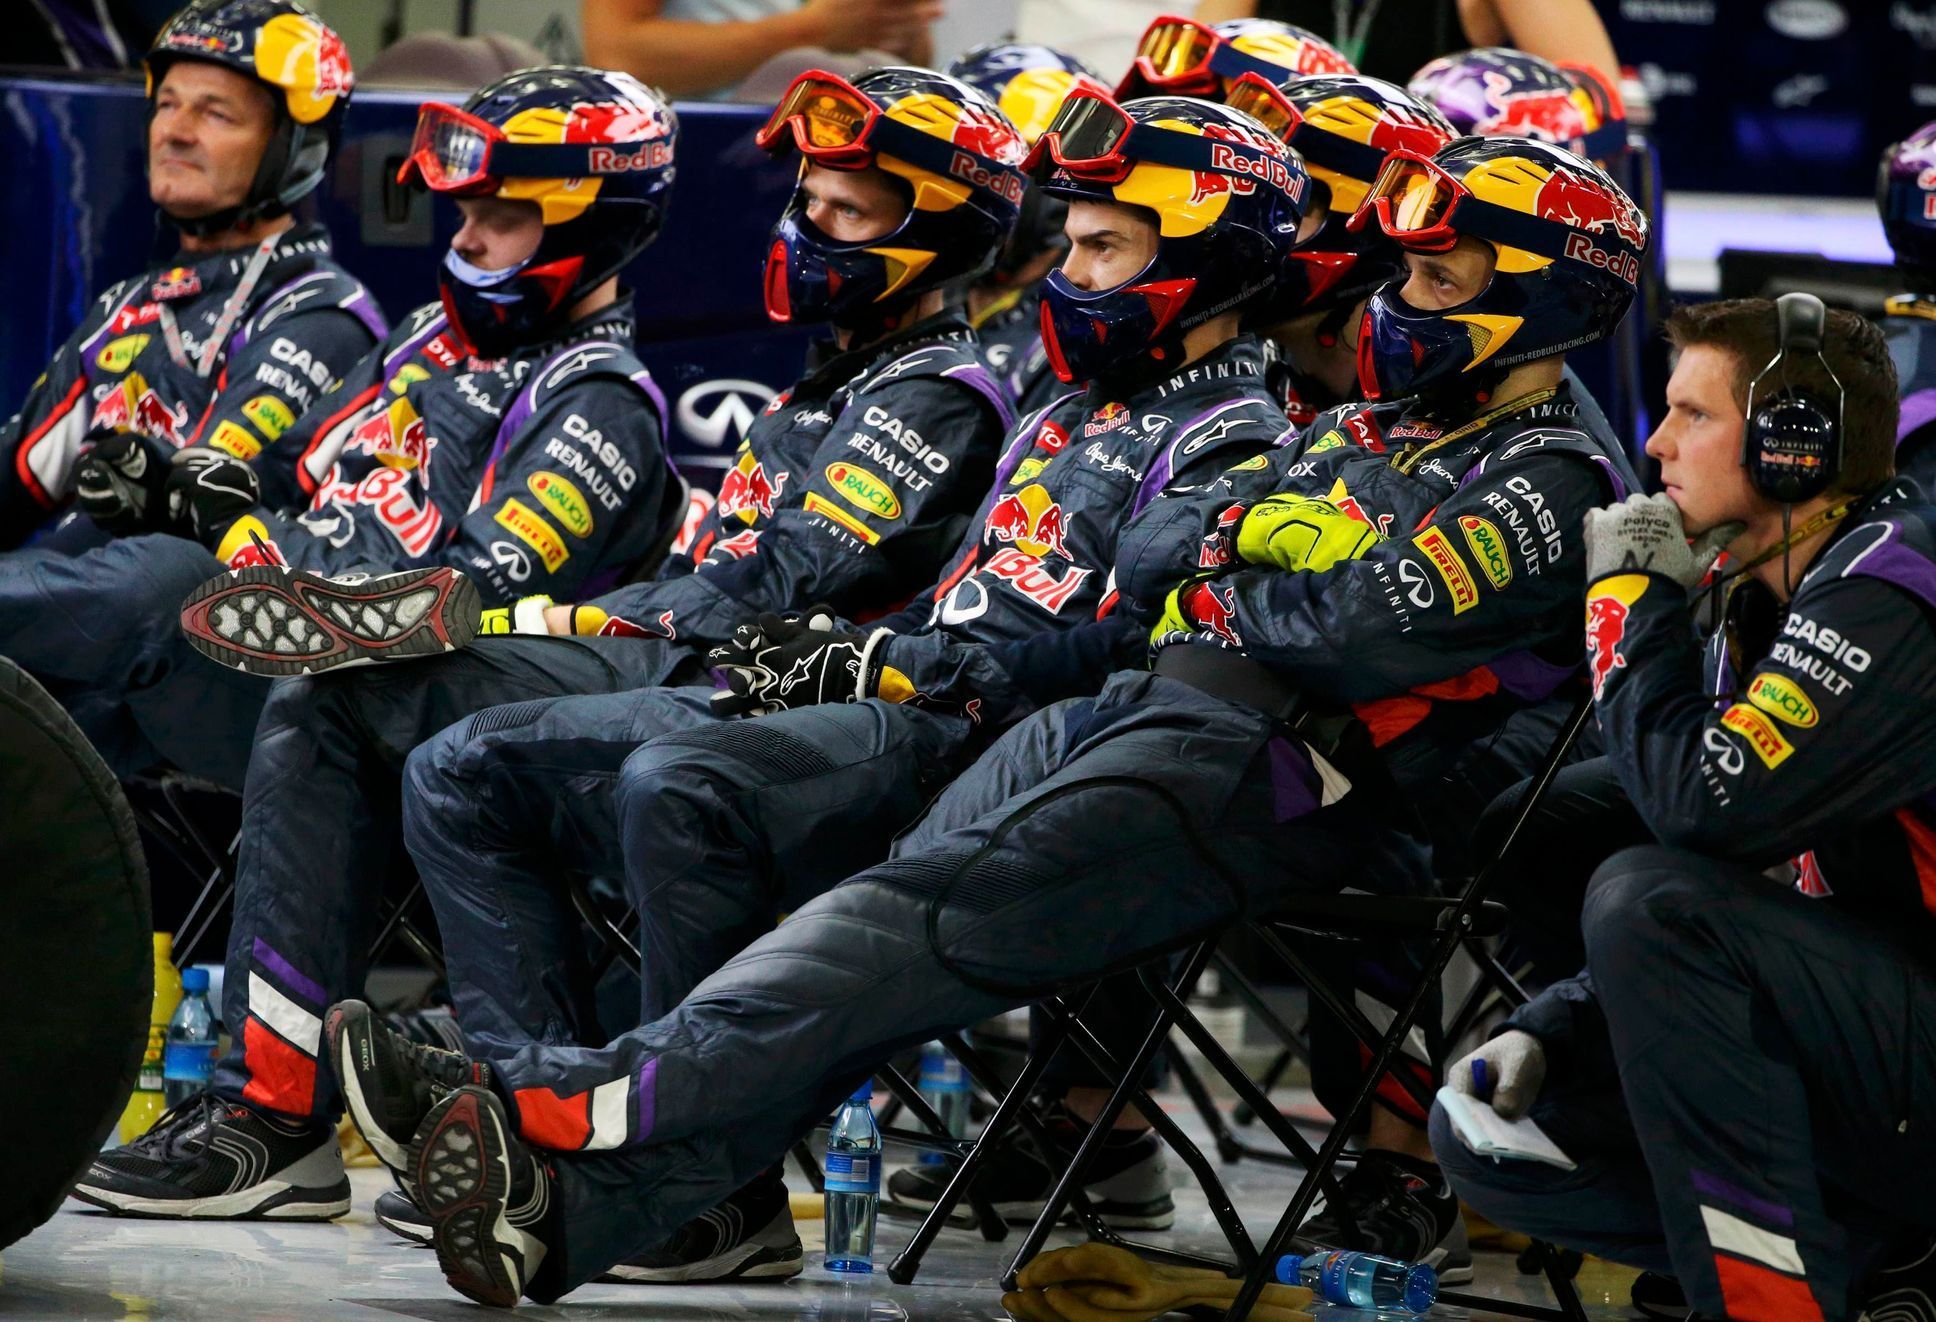 Members of the Red Bull Formula One team watch the Bahrain F1 Grand Prix at the Bahrain International Circuit (BIC) in Sakhir